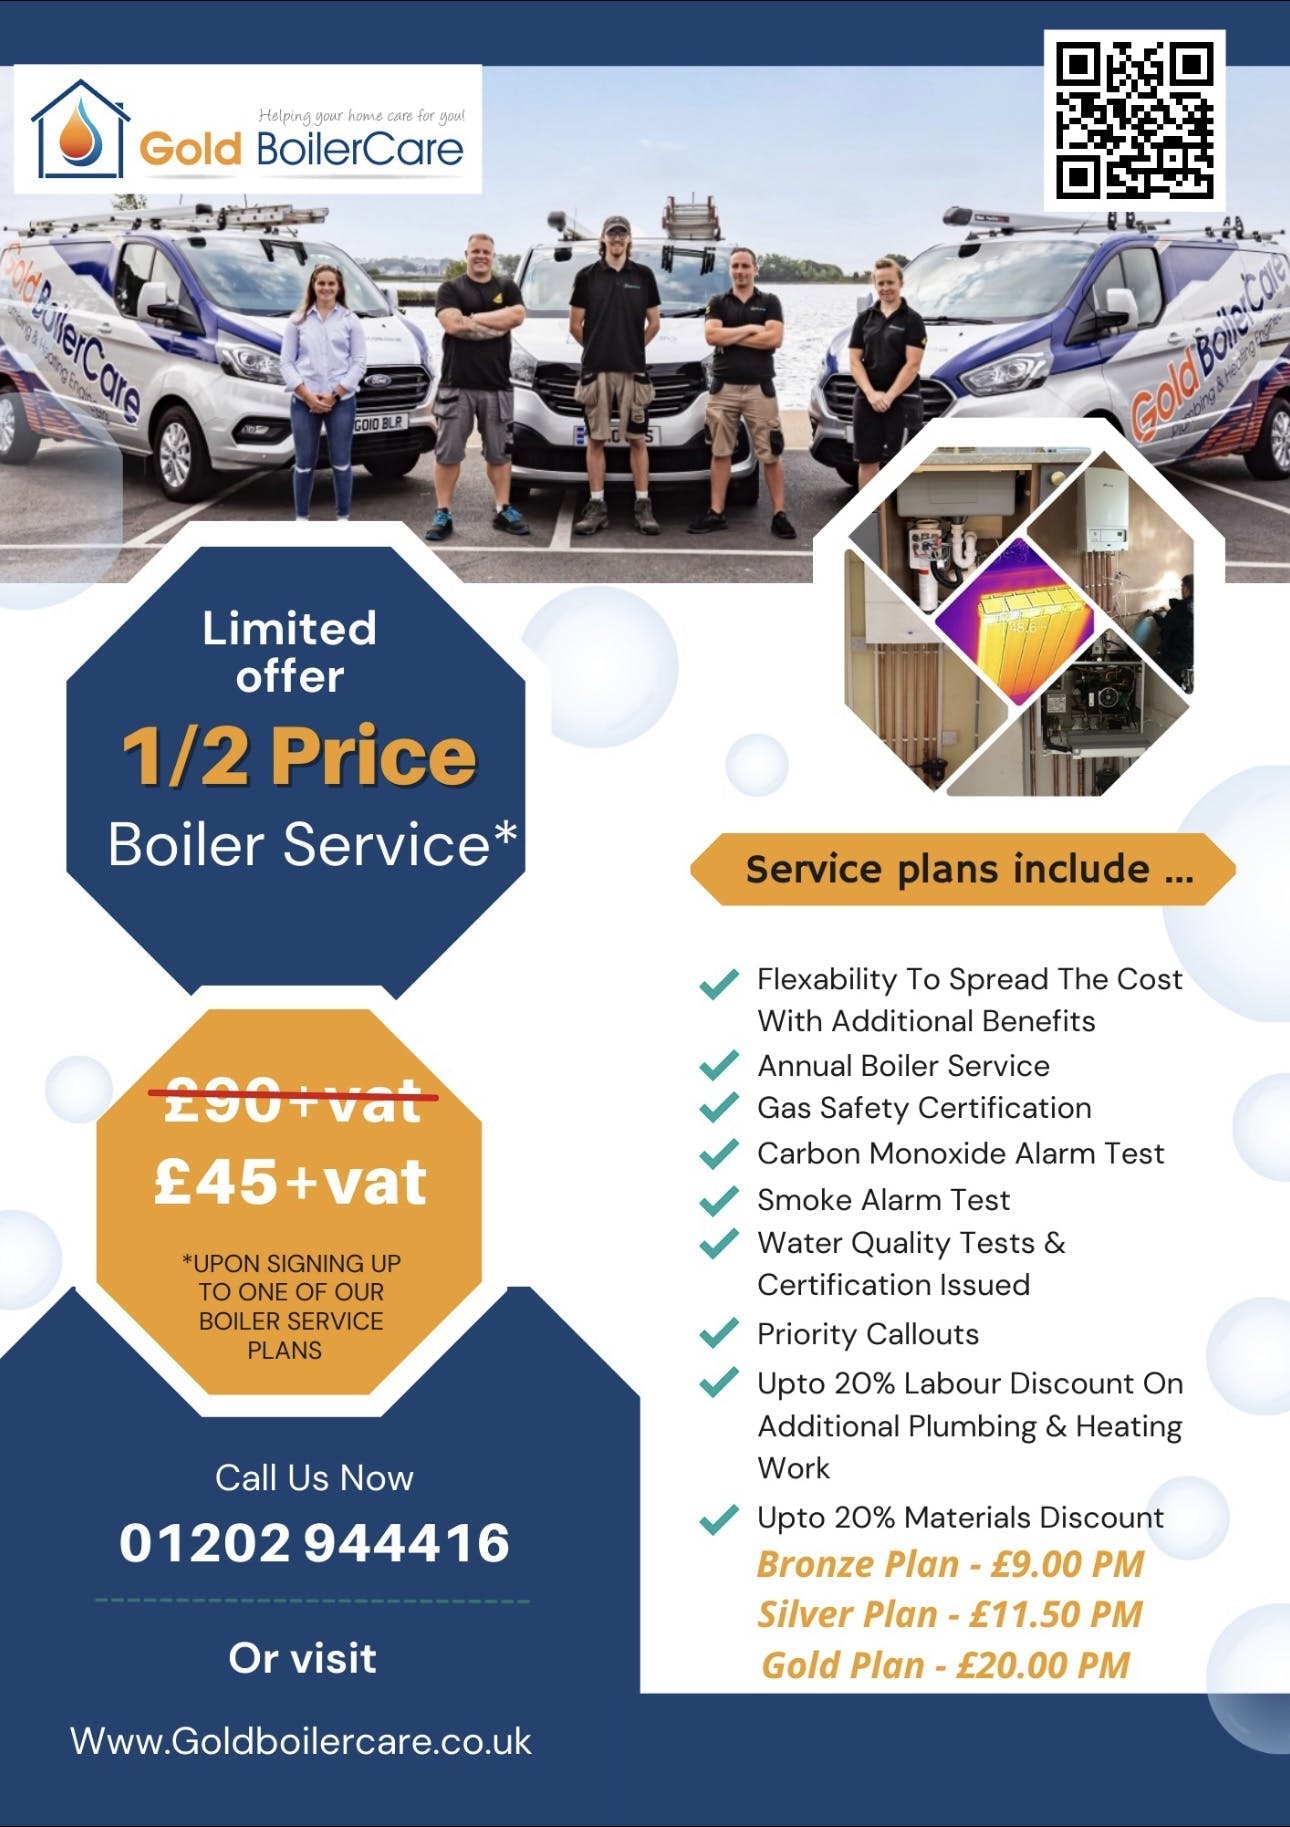 1/2 price boiler service when signing up to one of our service plans